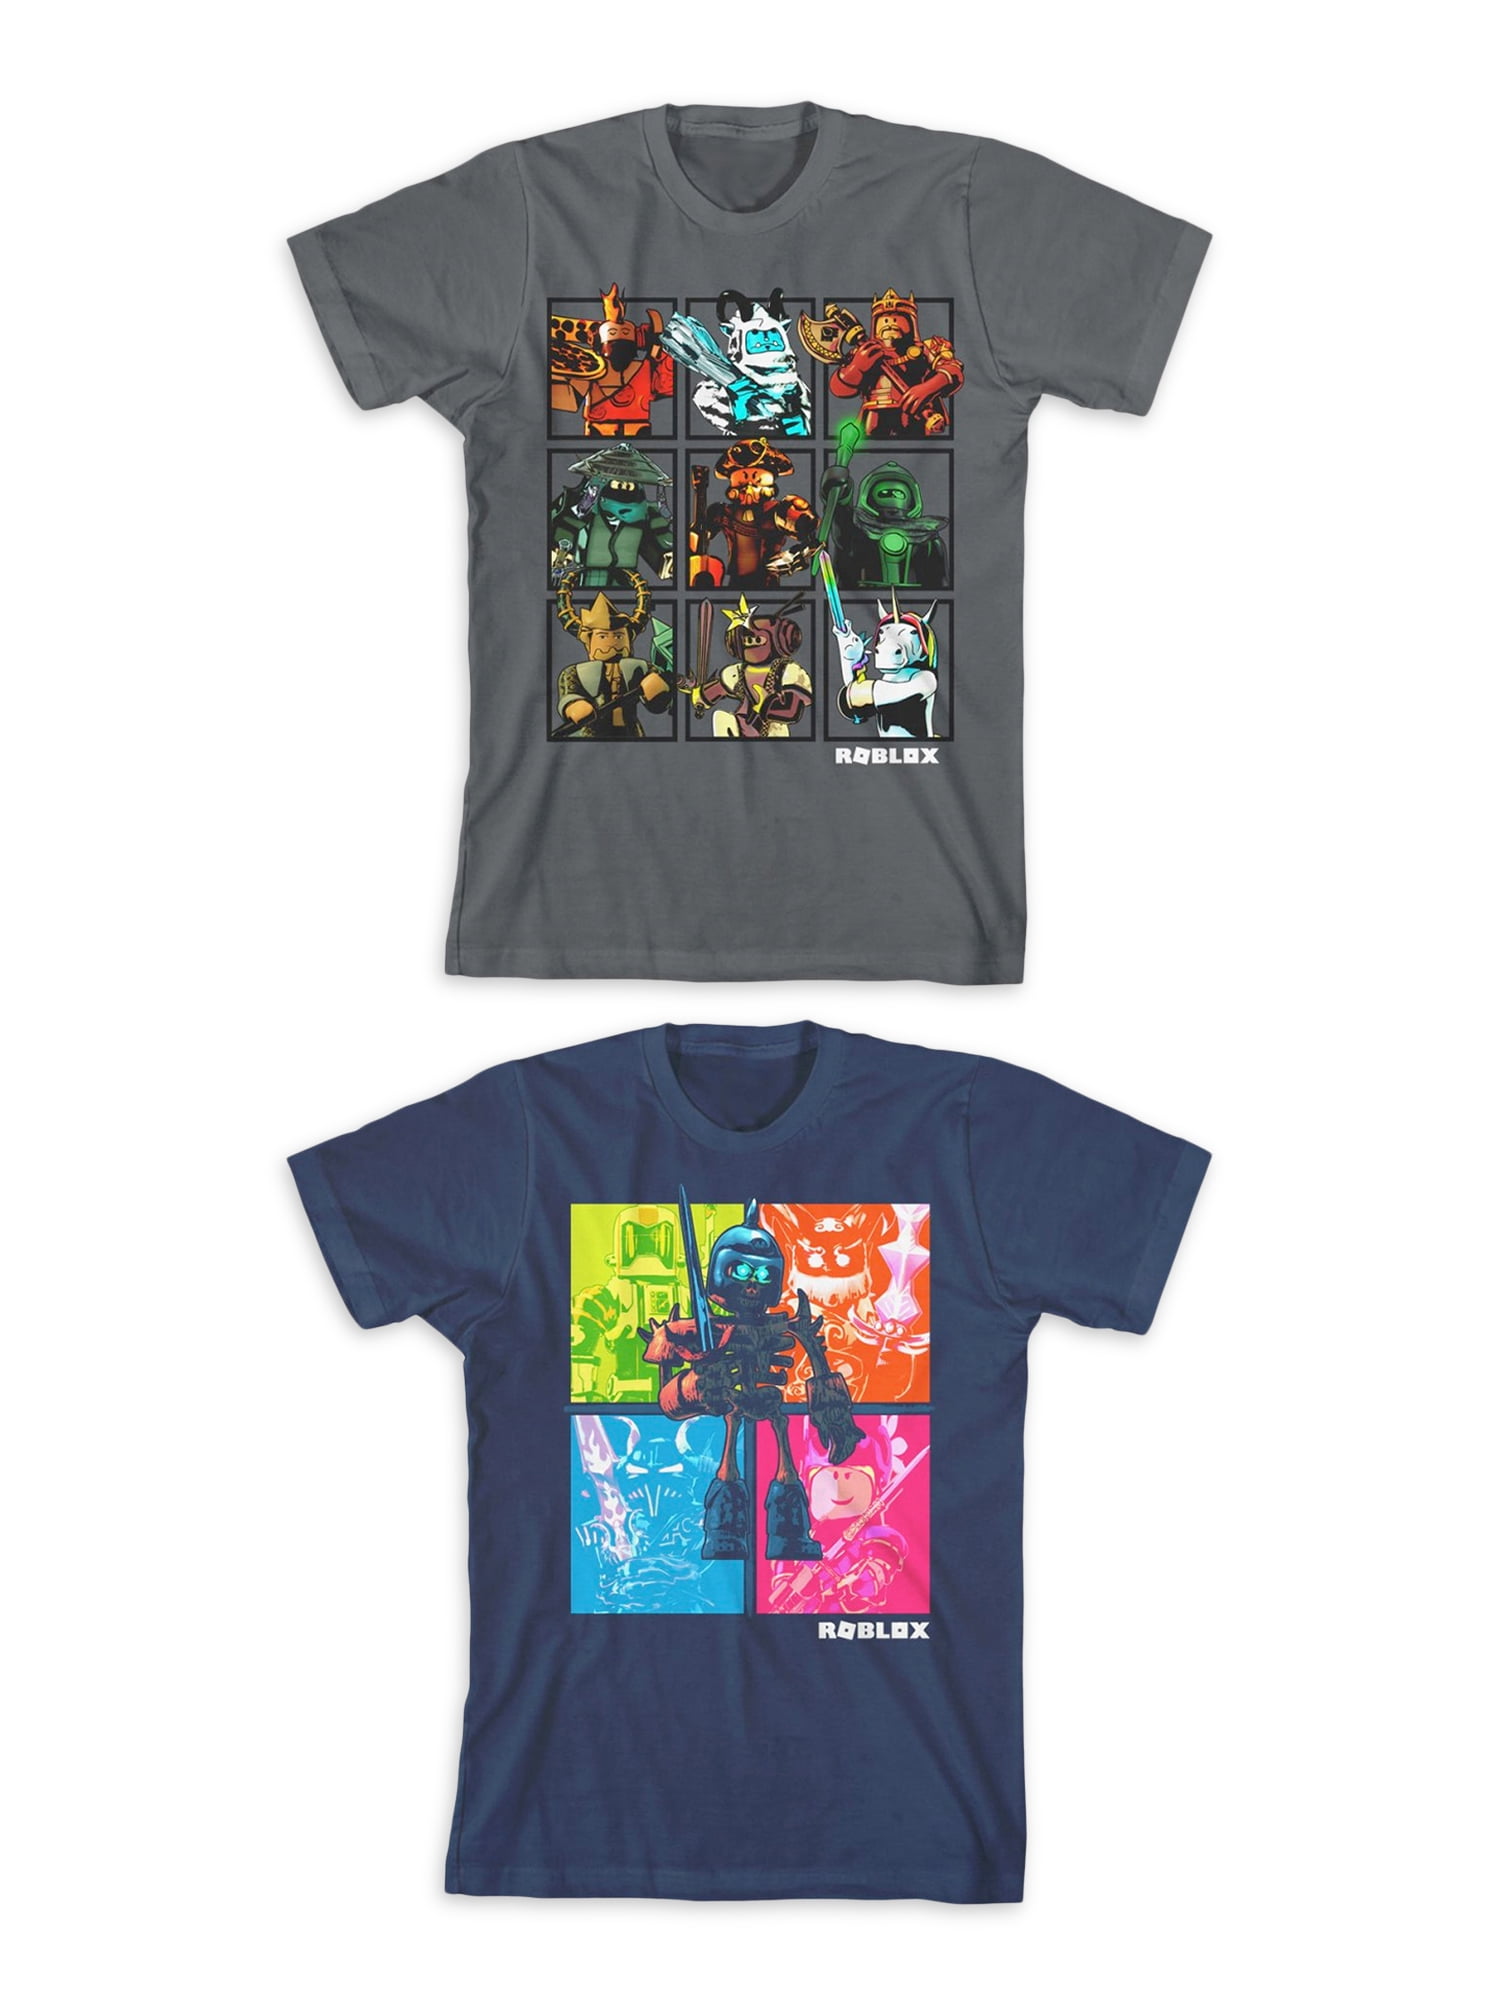 Roblox Roblox Boys Short Sleeve Graphic T Shirts 2 Pack Size 4 18 Walmart Com Walmart Com - what is the size for roblox tshirts